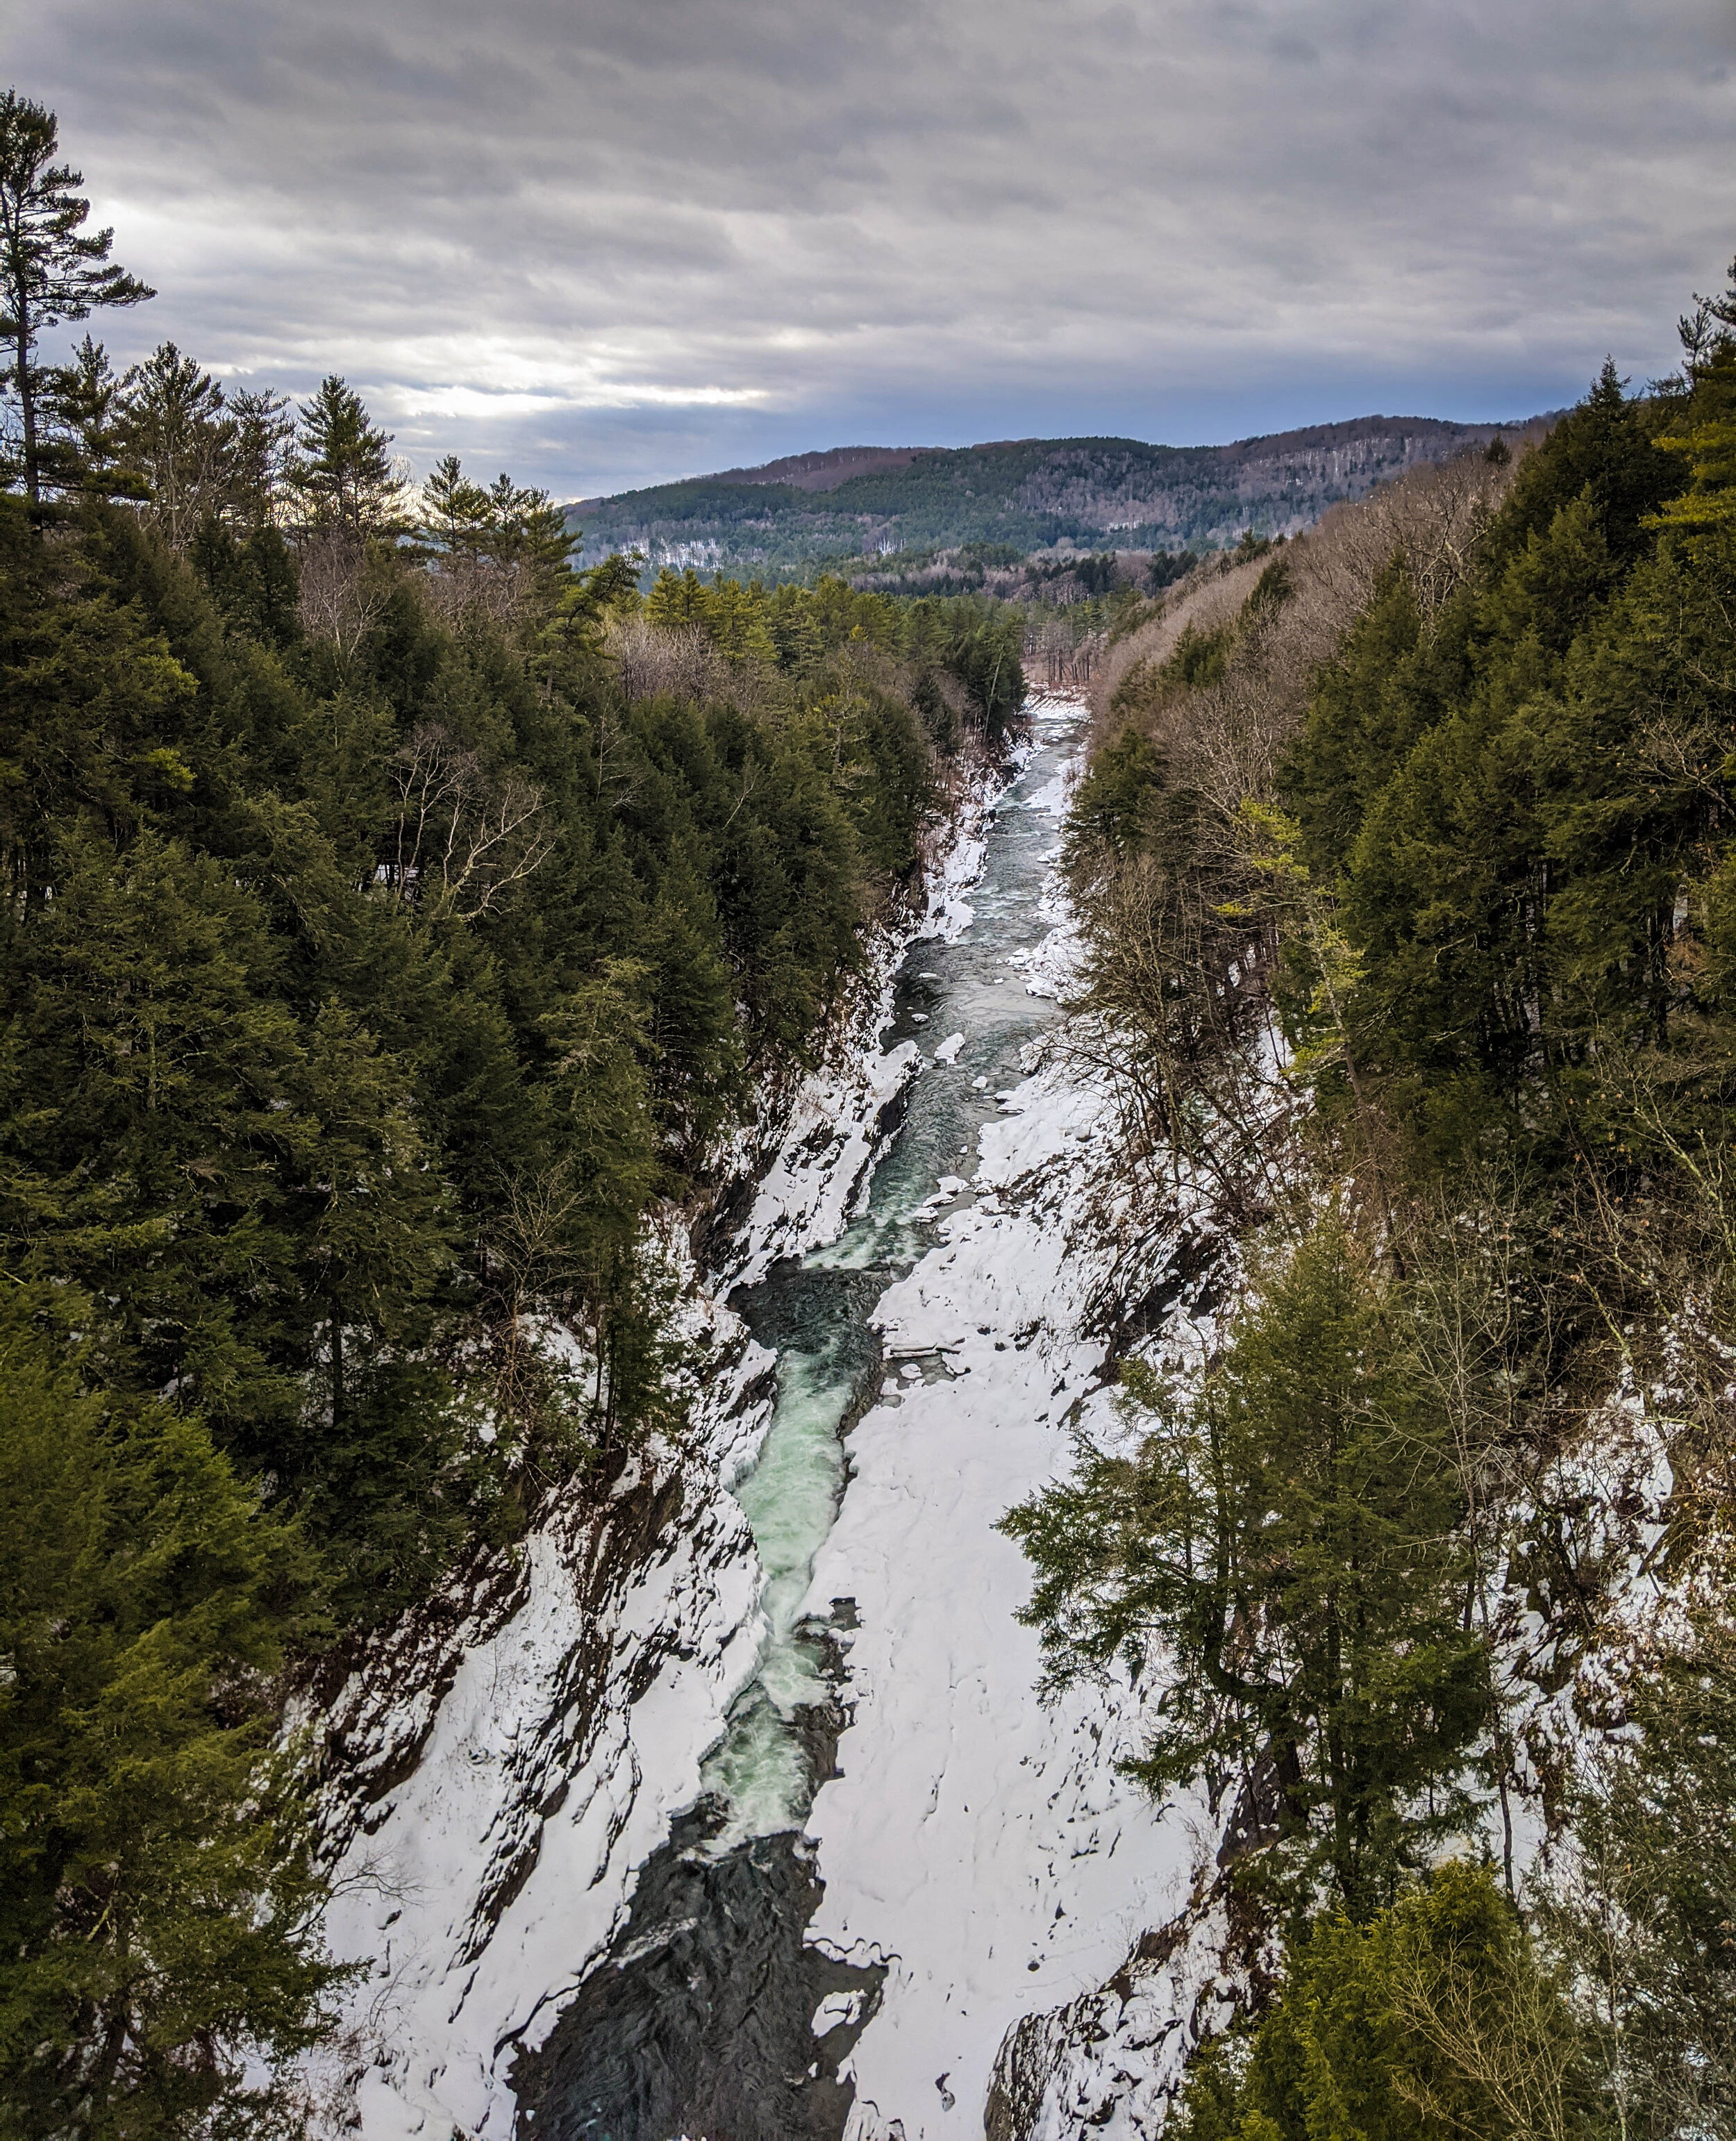 Quechee gorge, view from the bridge